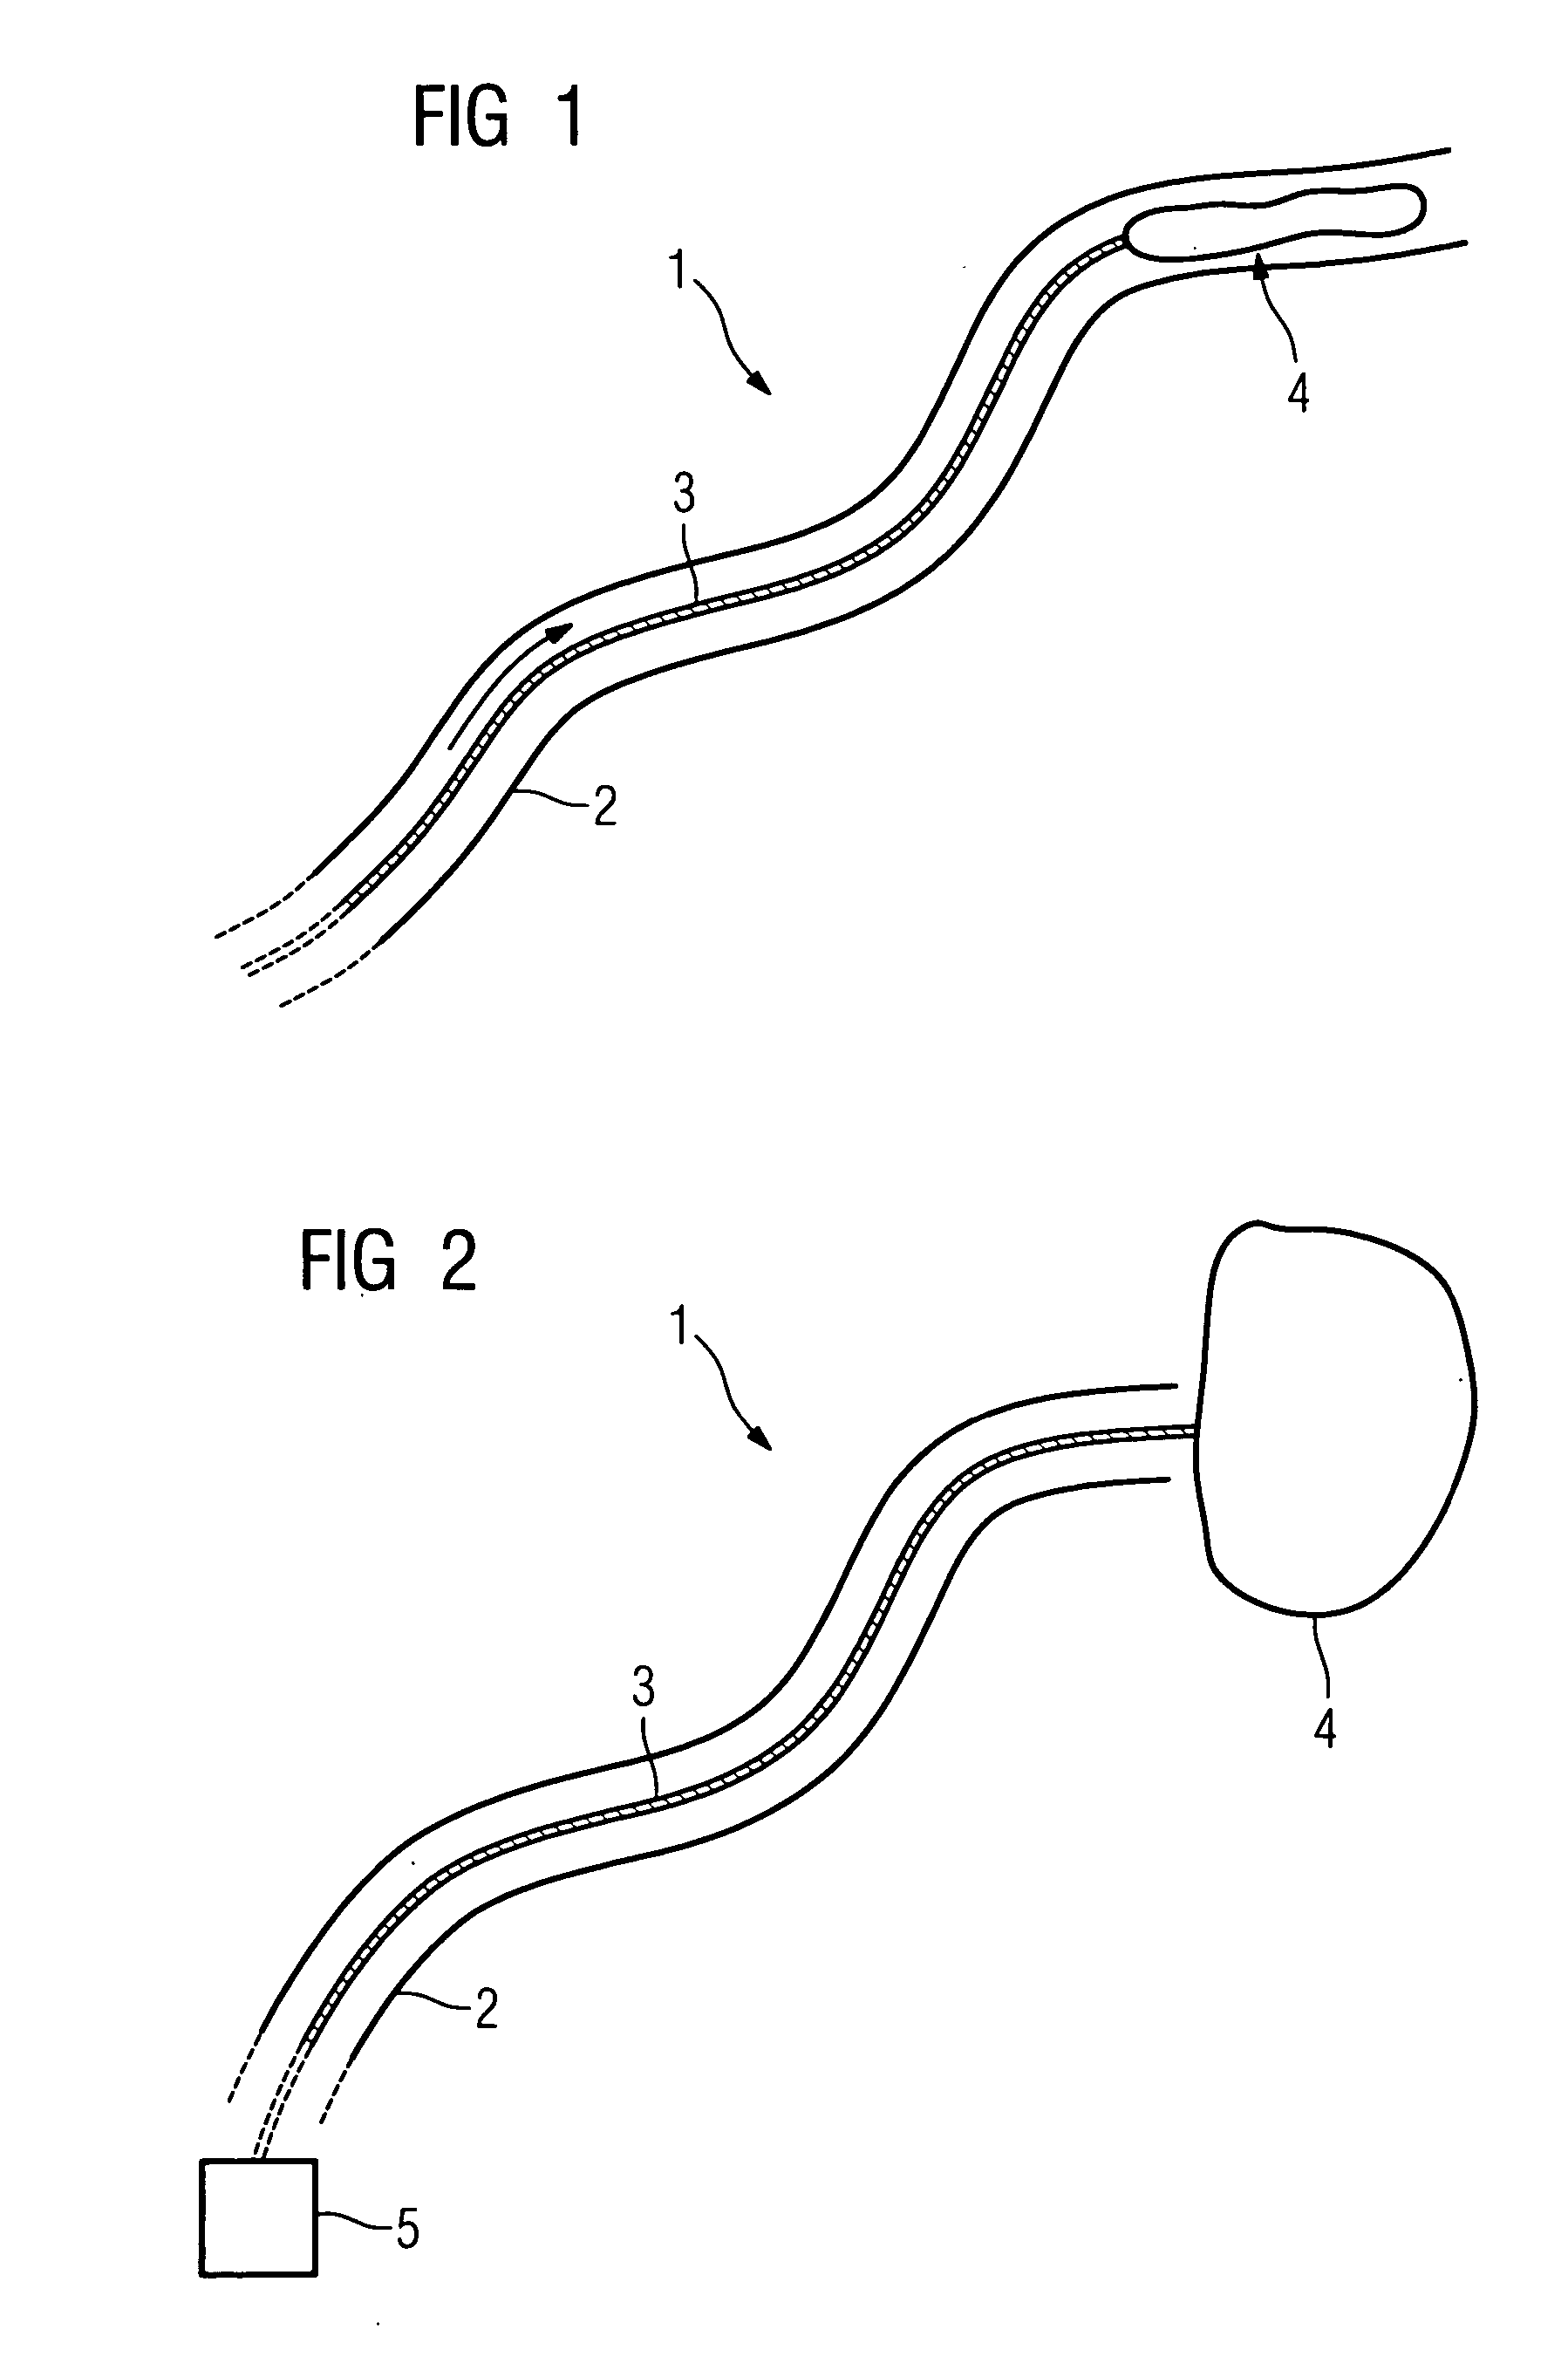 Ablation catheter for setting a lesion